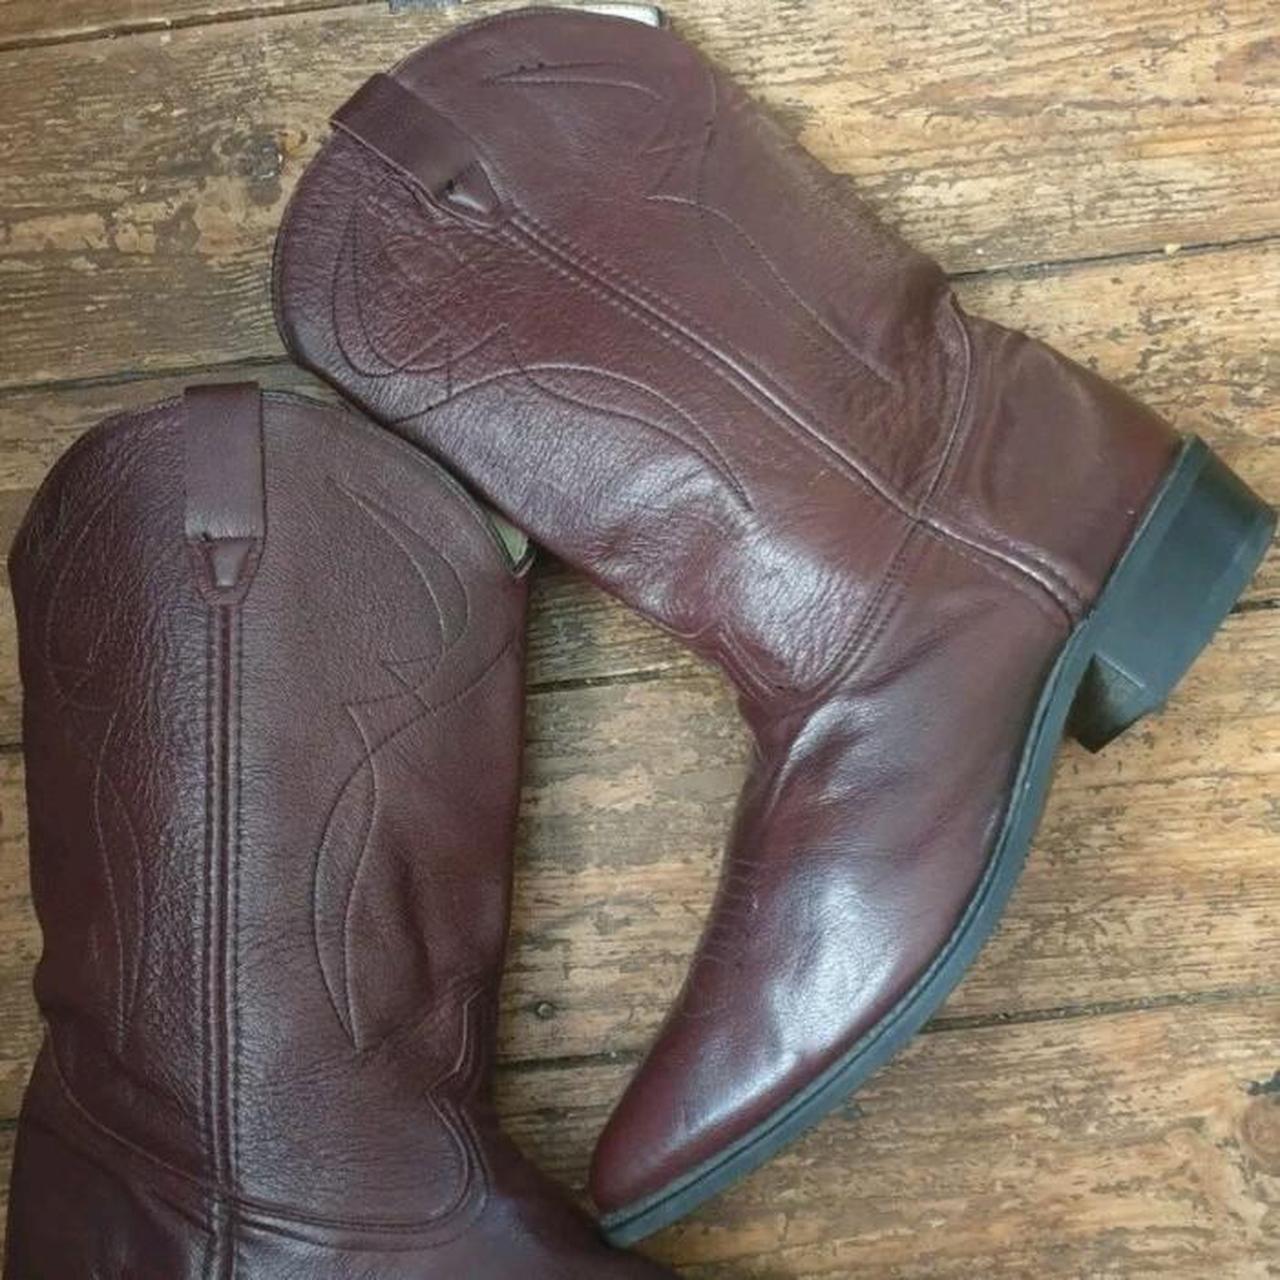 Men's Red and Burgundy Boots